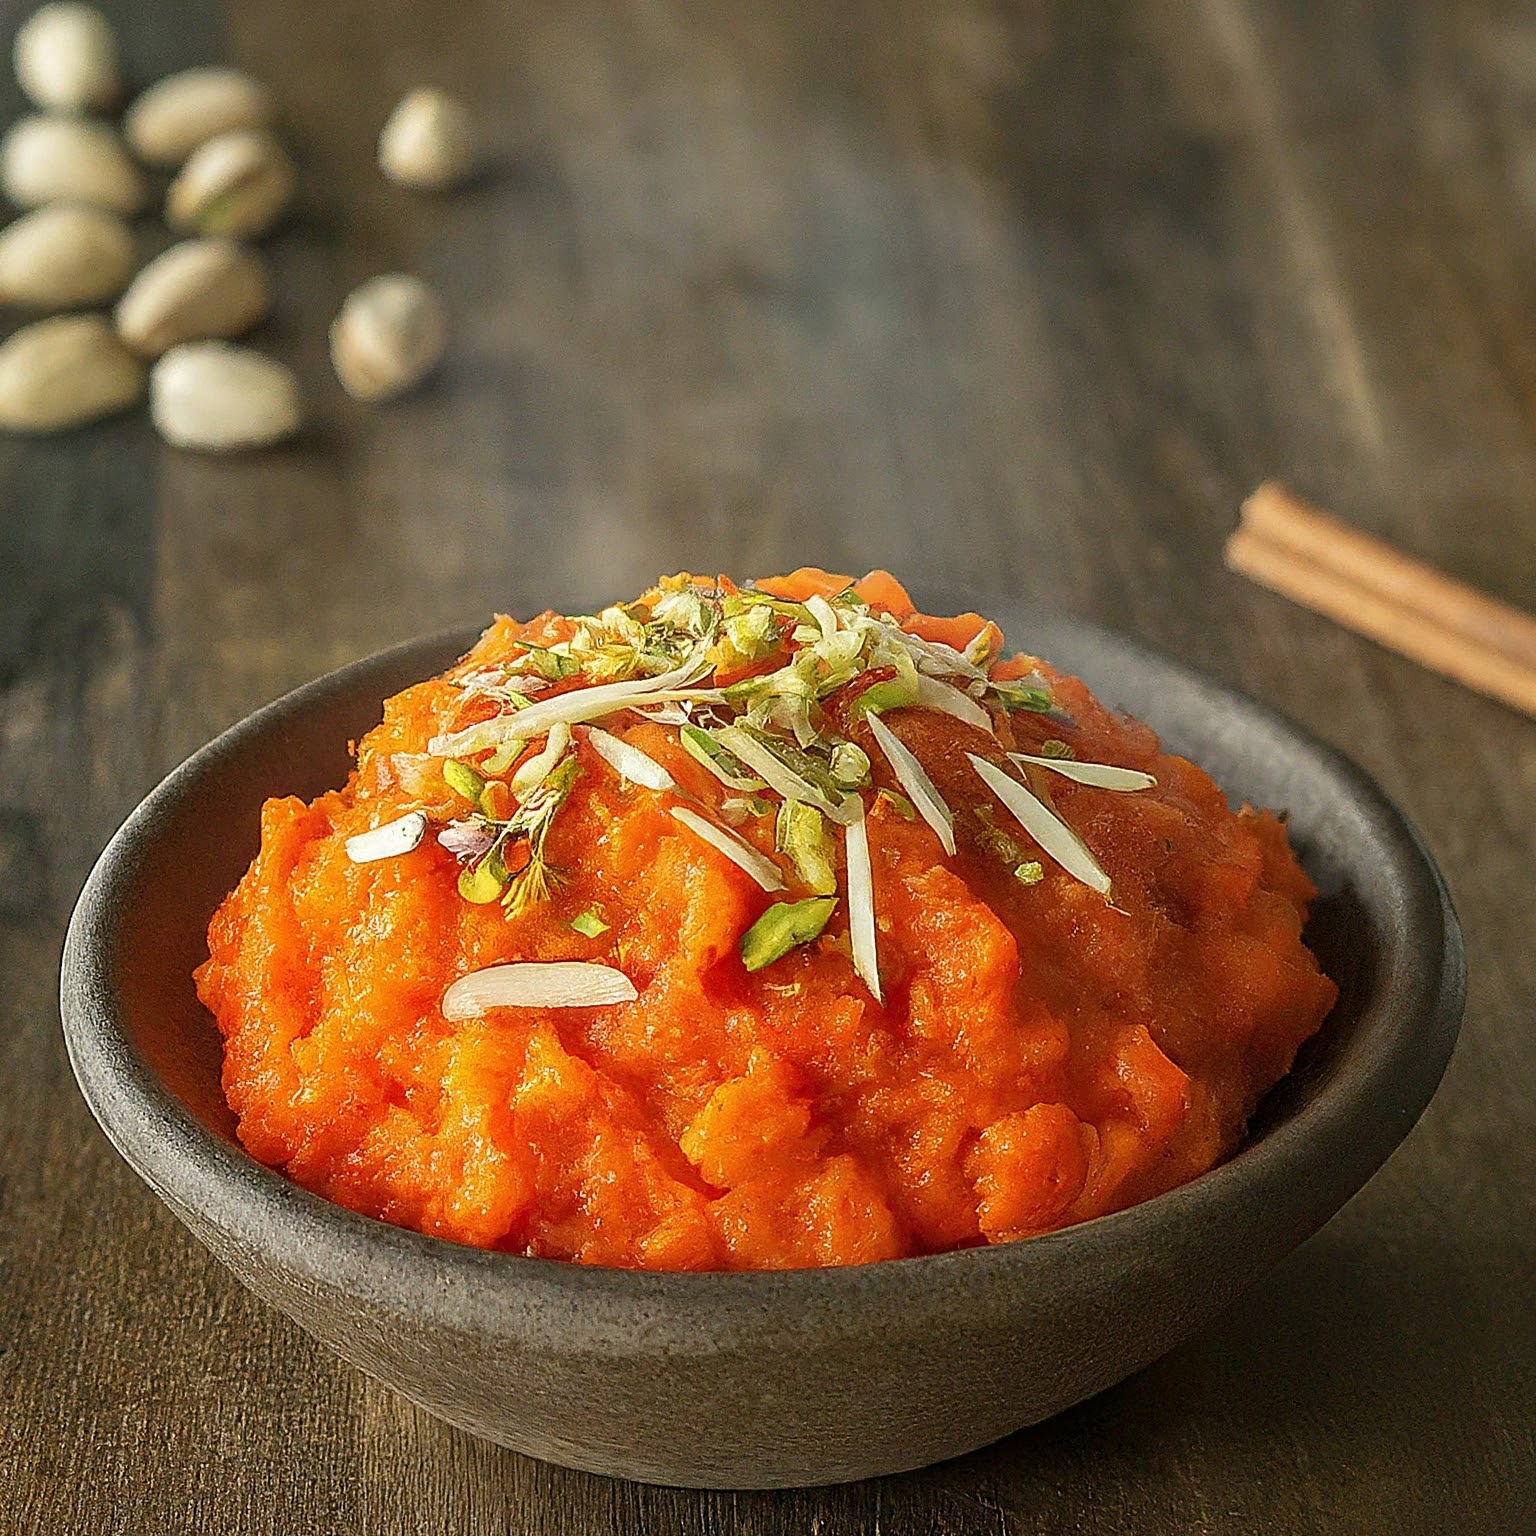 A delicious serving of Gajar Halwa, a sweet carrot pudding dessert from India.